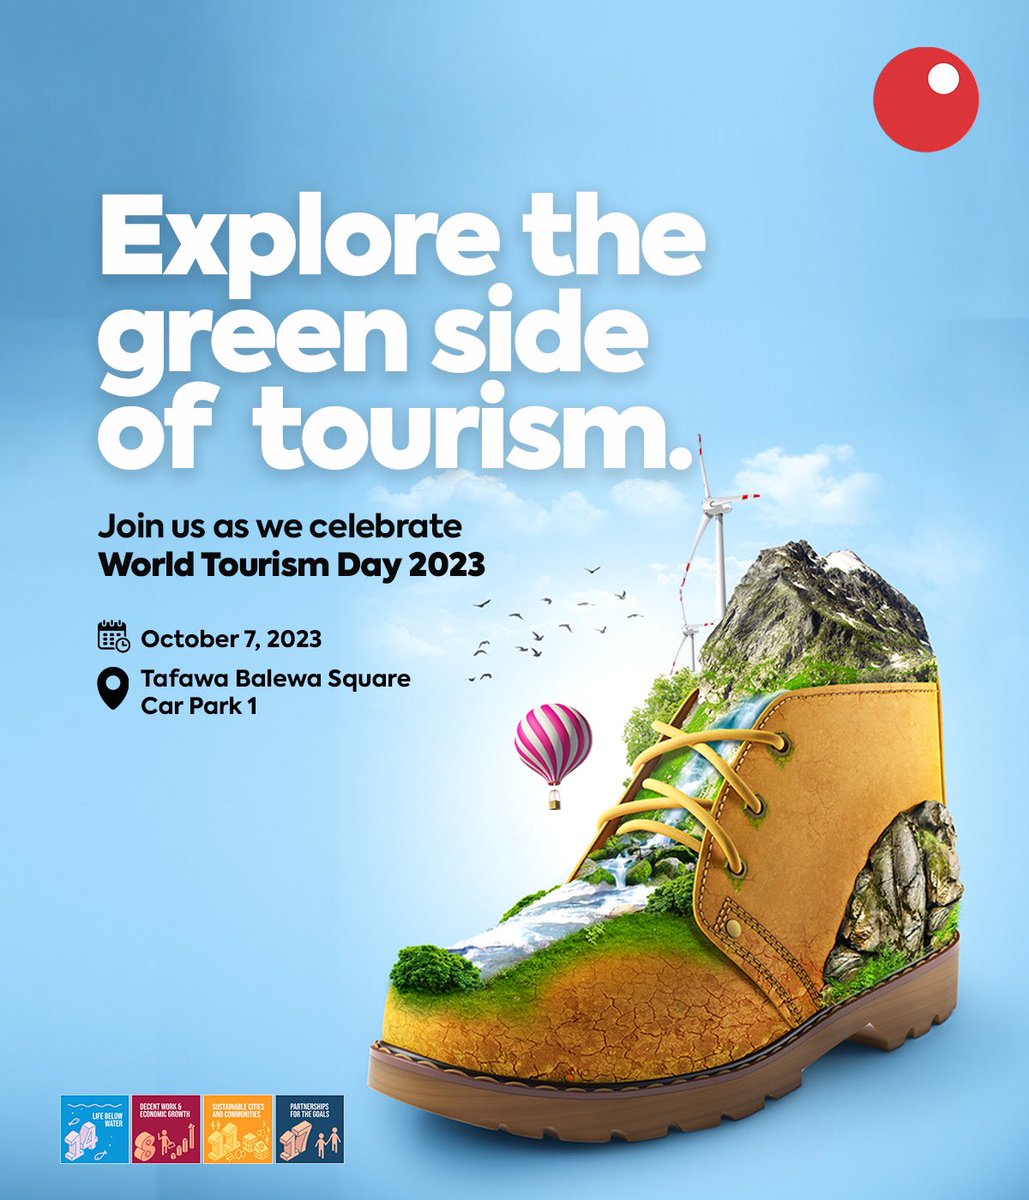 Countdown to our World Tourism Day Celebration!

Journey with us to the greener side.

#WorldTourismDay
#GreenInvestment